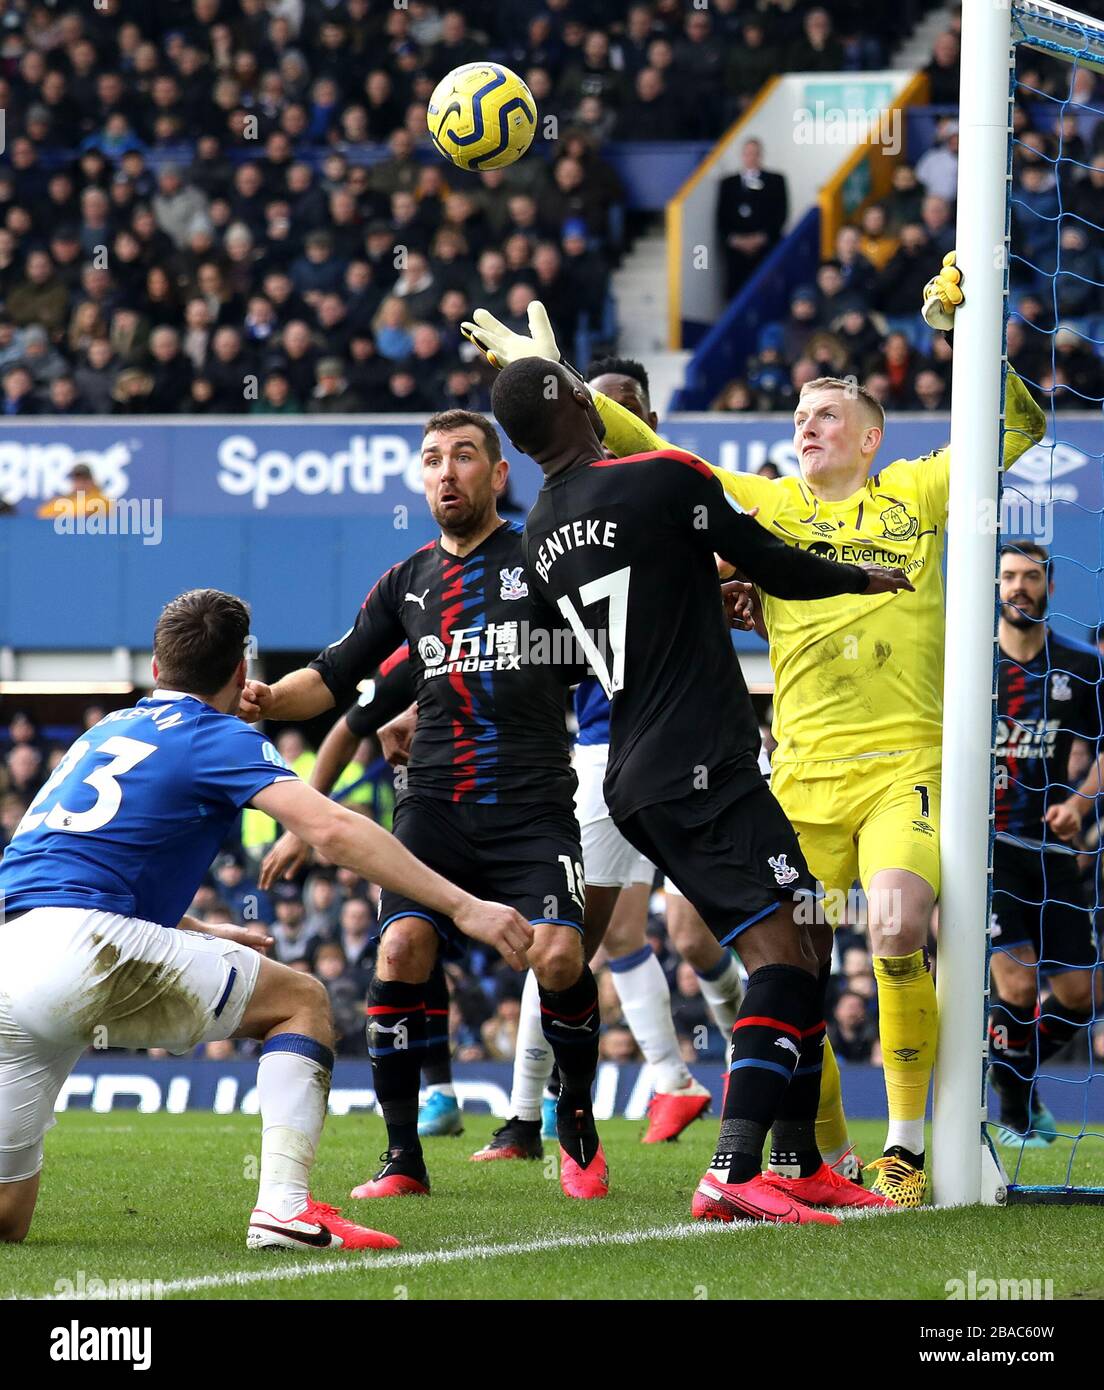 Everton's Jordan Pickford (right) reaches for the ball above Crystal Palace's Christian Benteke Stock Photo